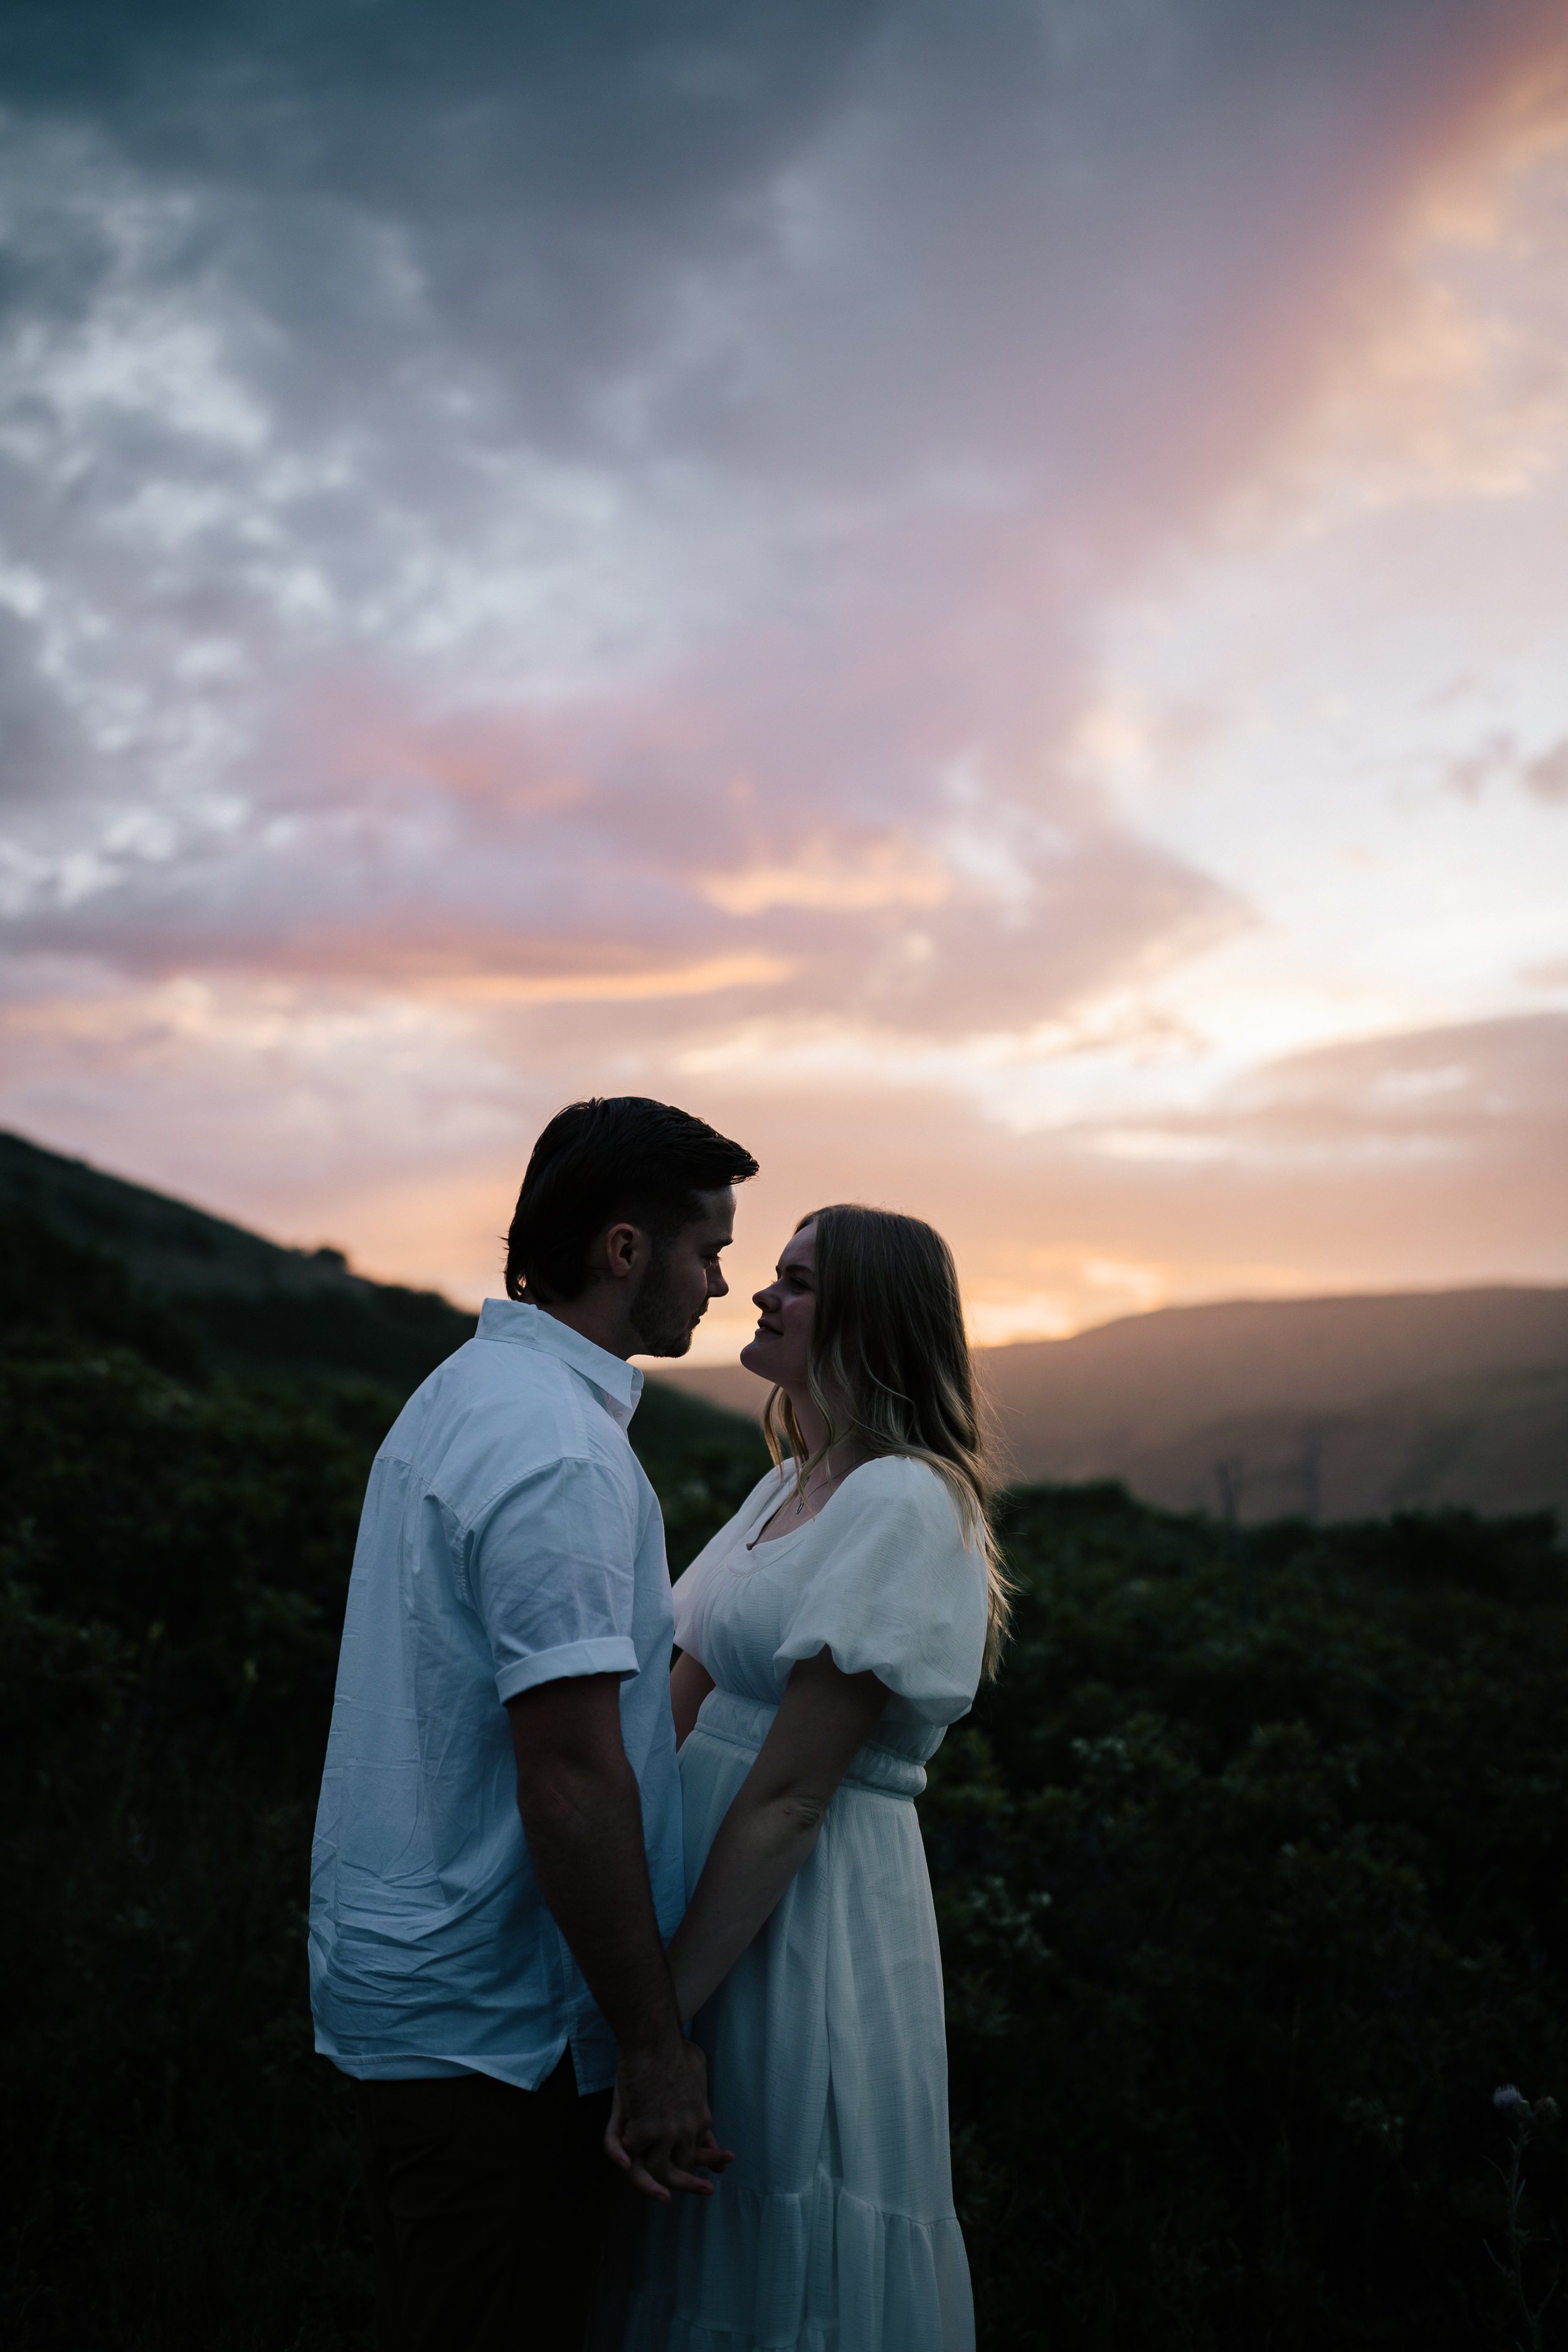  Summer anniversary couples session in the mountains. A young couple poses as the sun sets on a warm summer night. Utah photographer. #utahphotographer #utahengagements  